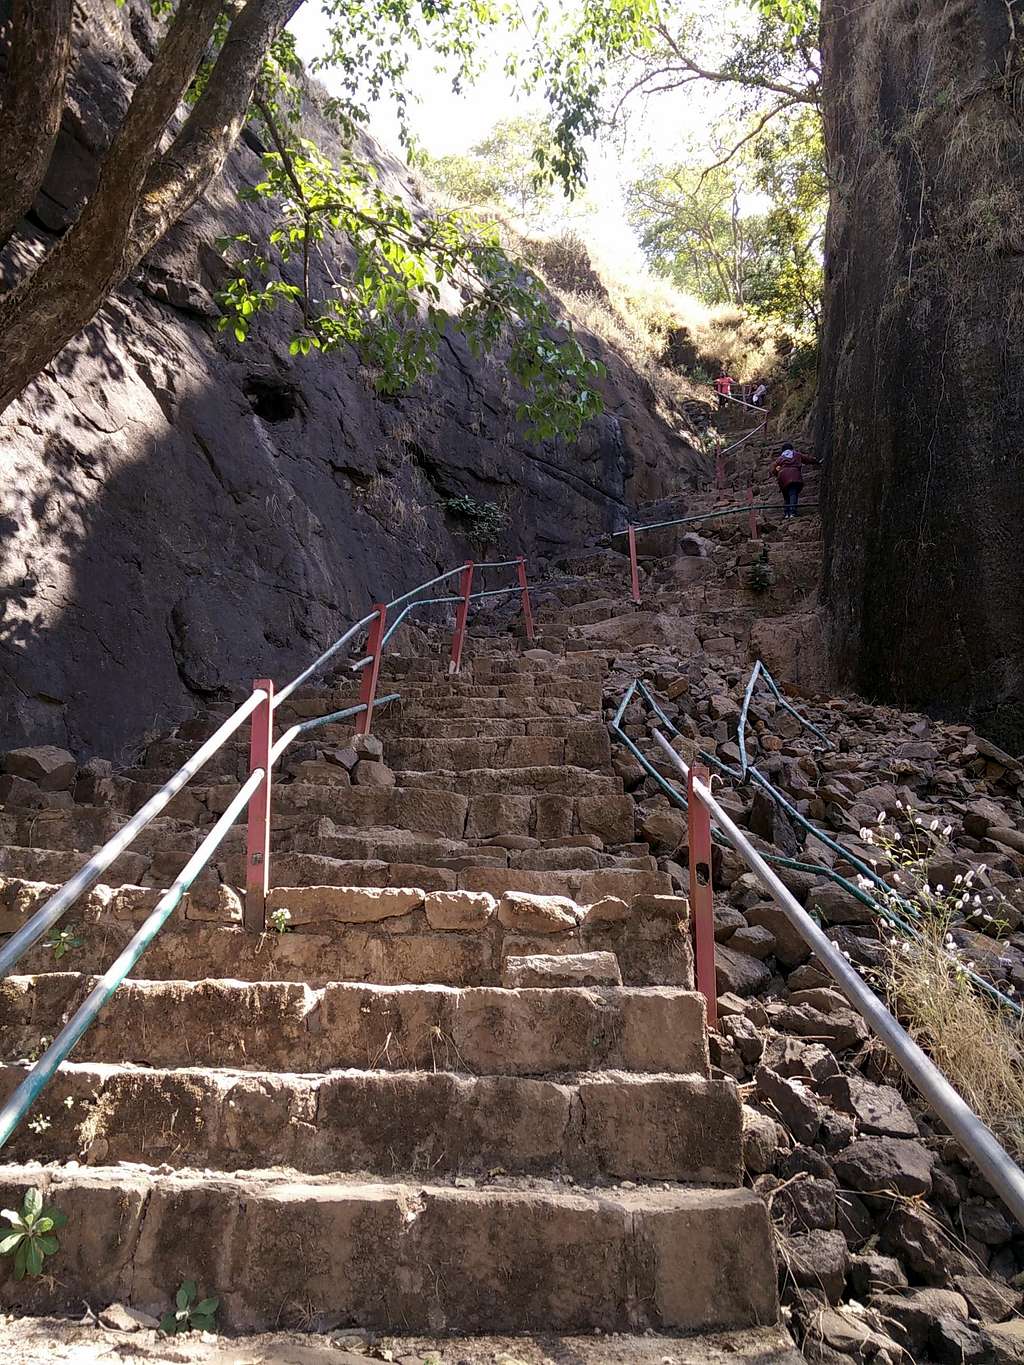 Lat part of the climb - steps